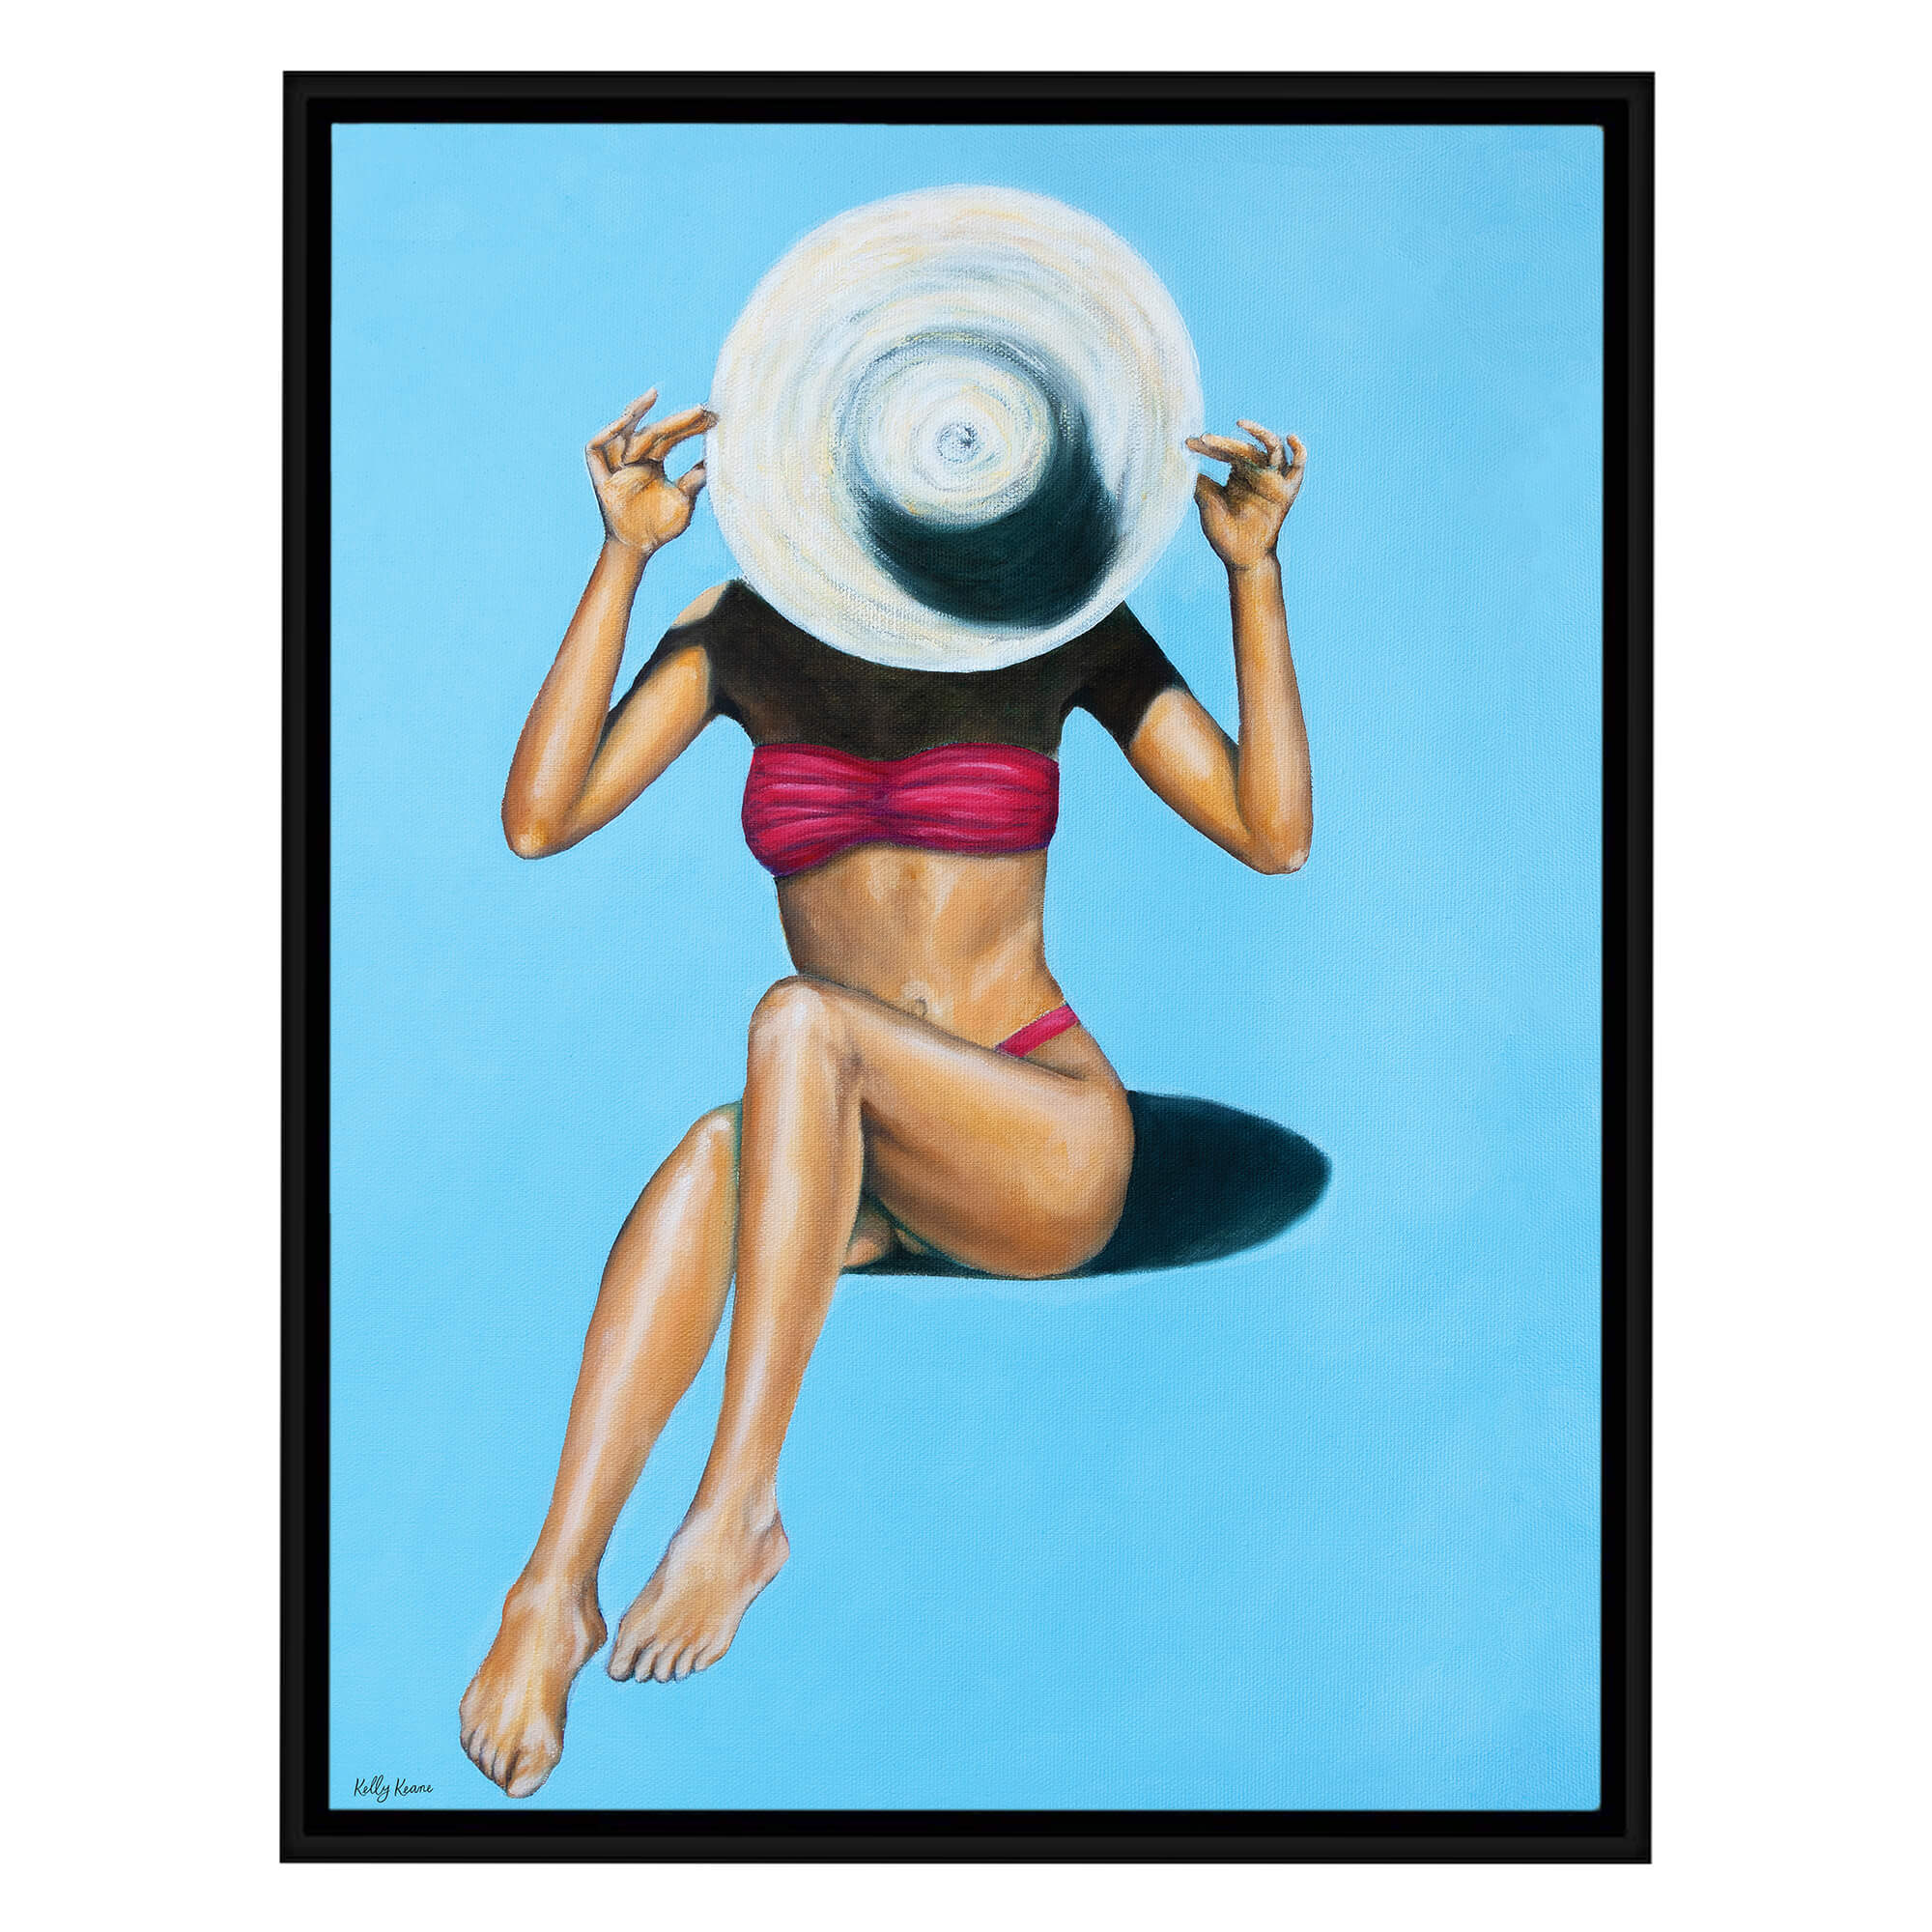 Canvas art print featuring a woman sitting with sky blue background by Hawaii artist Kelly Keane